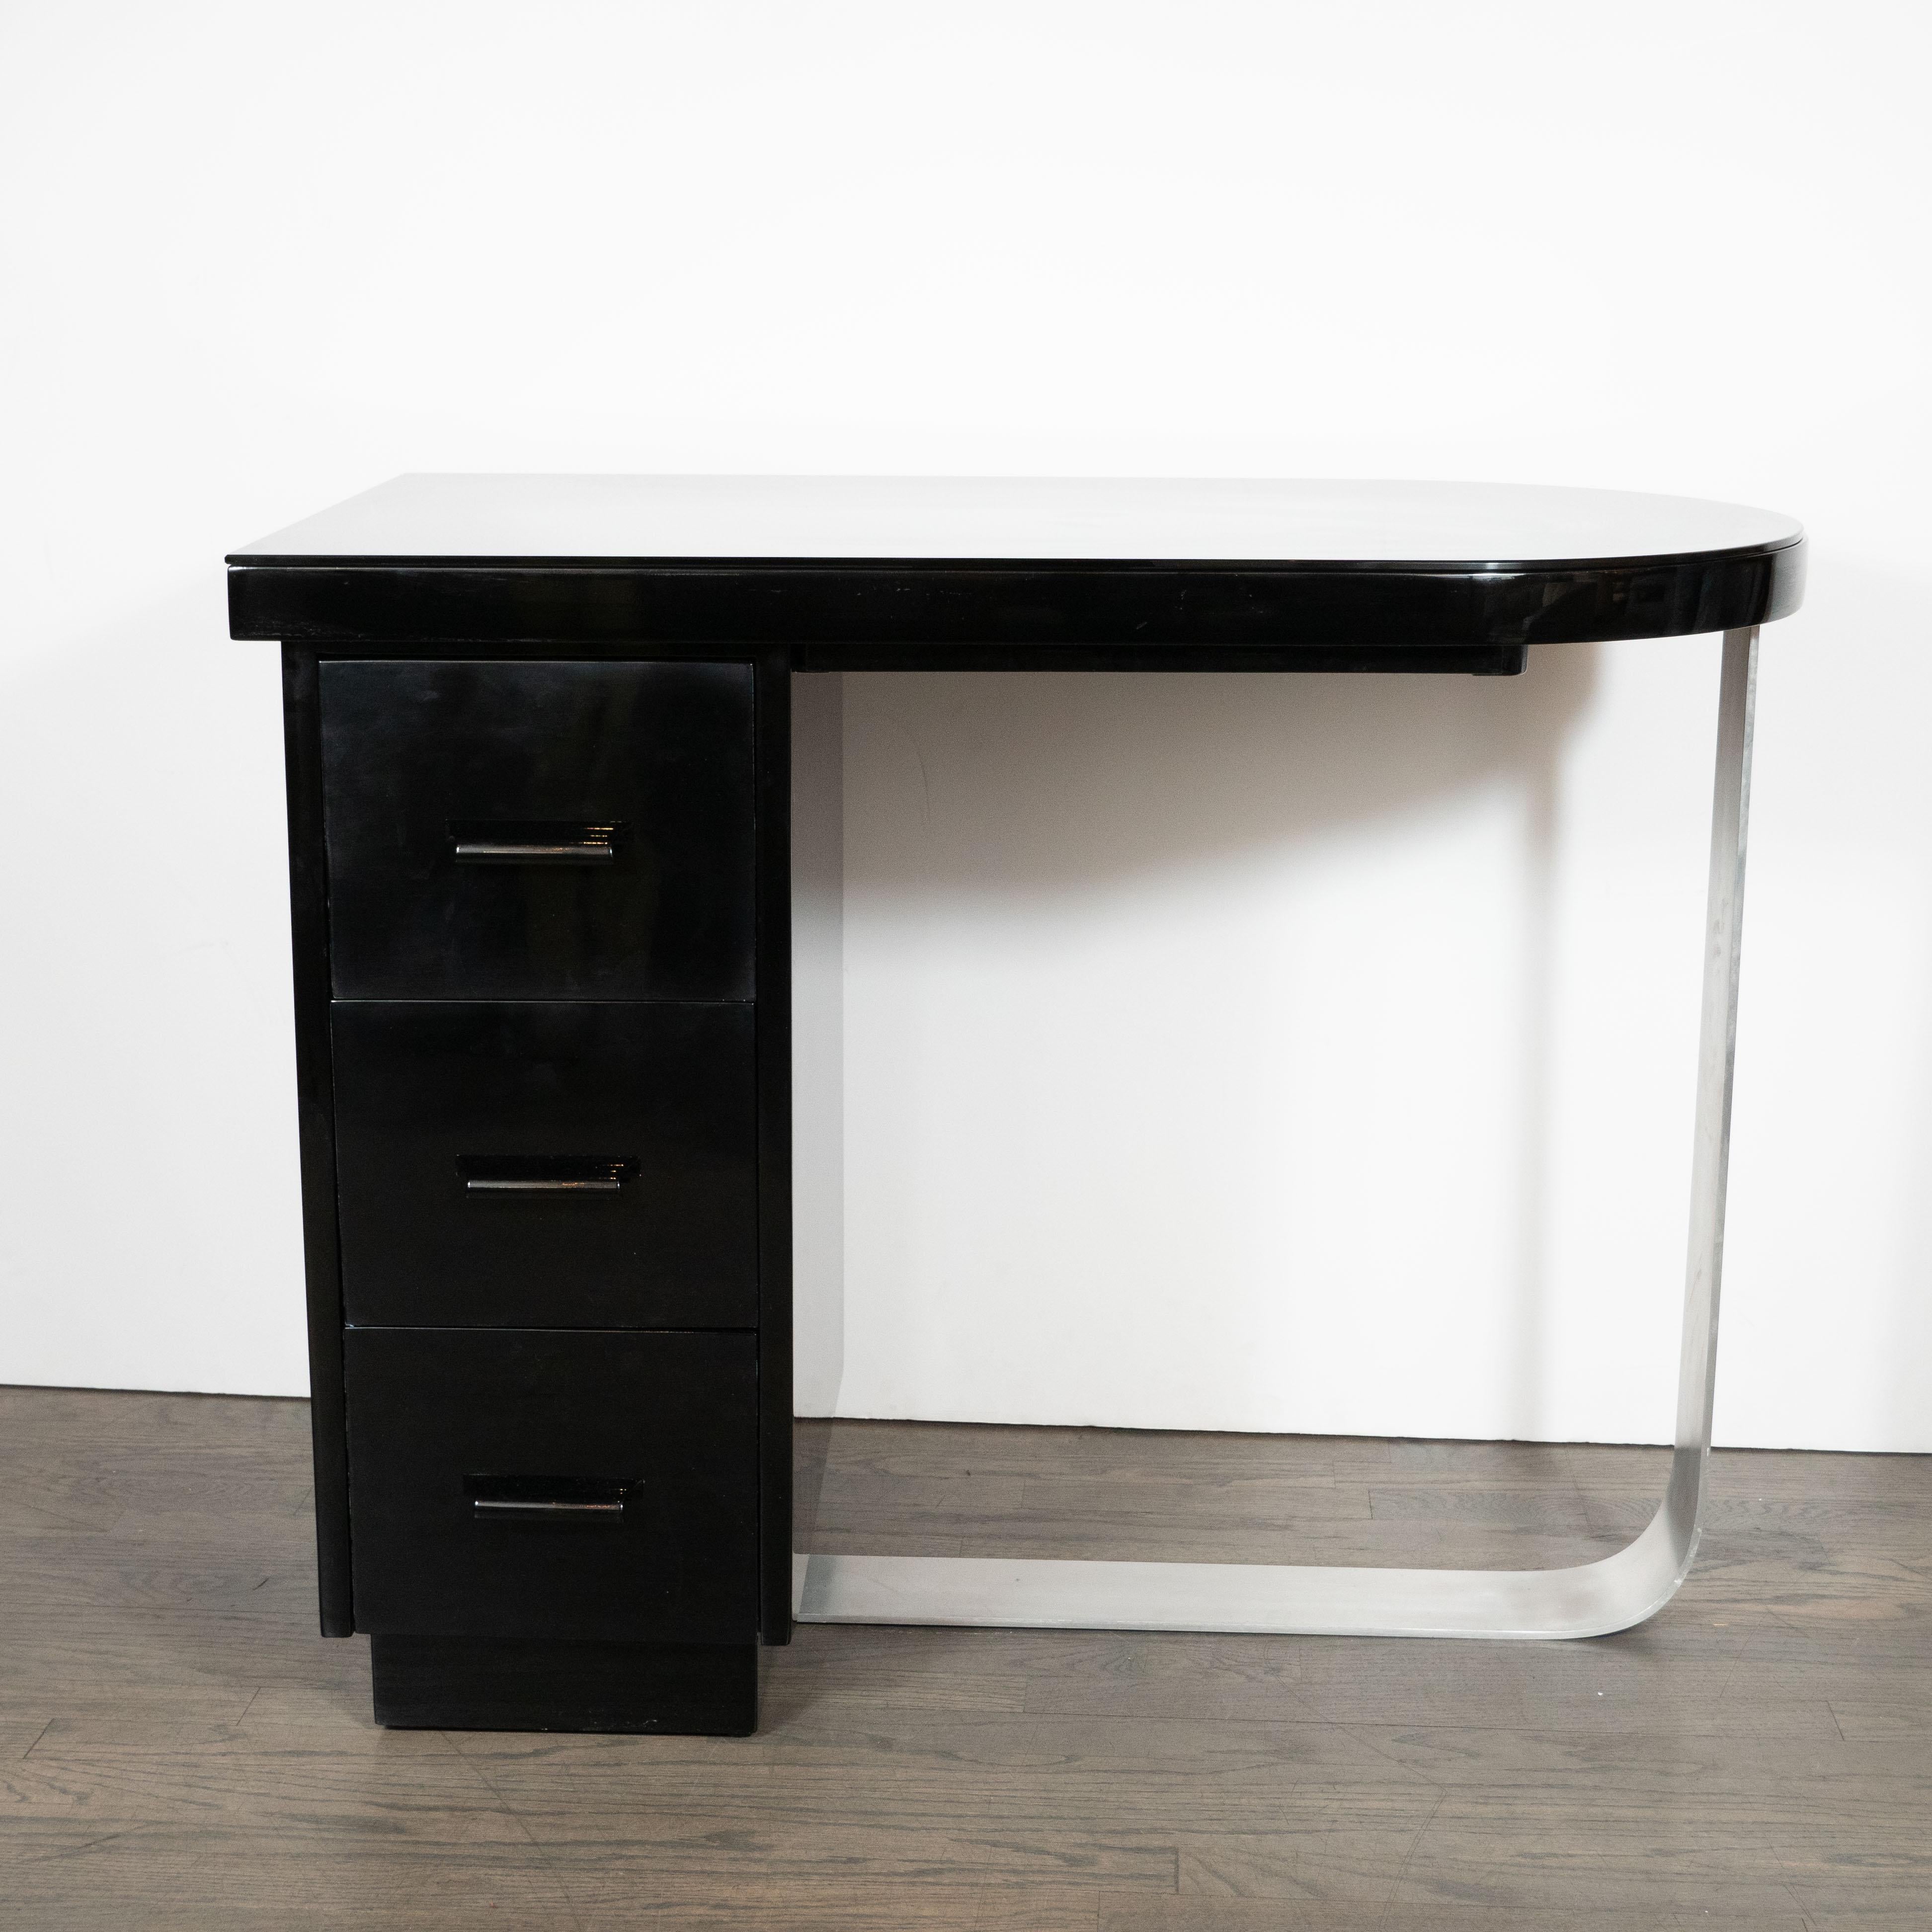 This elegant Machine Age Art Deco desk was realized in the United States, circa 1935. It features a streamlined black lacquer top (fitted with a layer of protective black glass) suggesting a stylized bullet- a form that manifests the period's